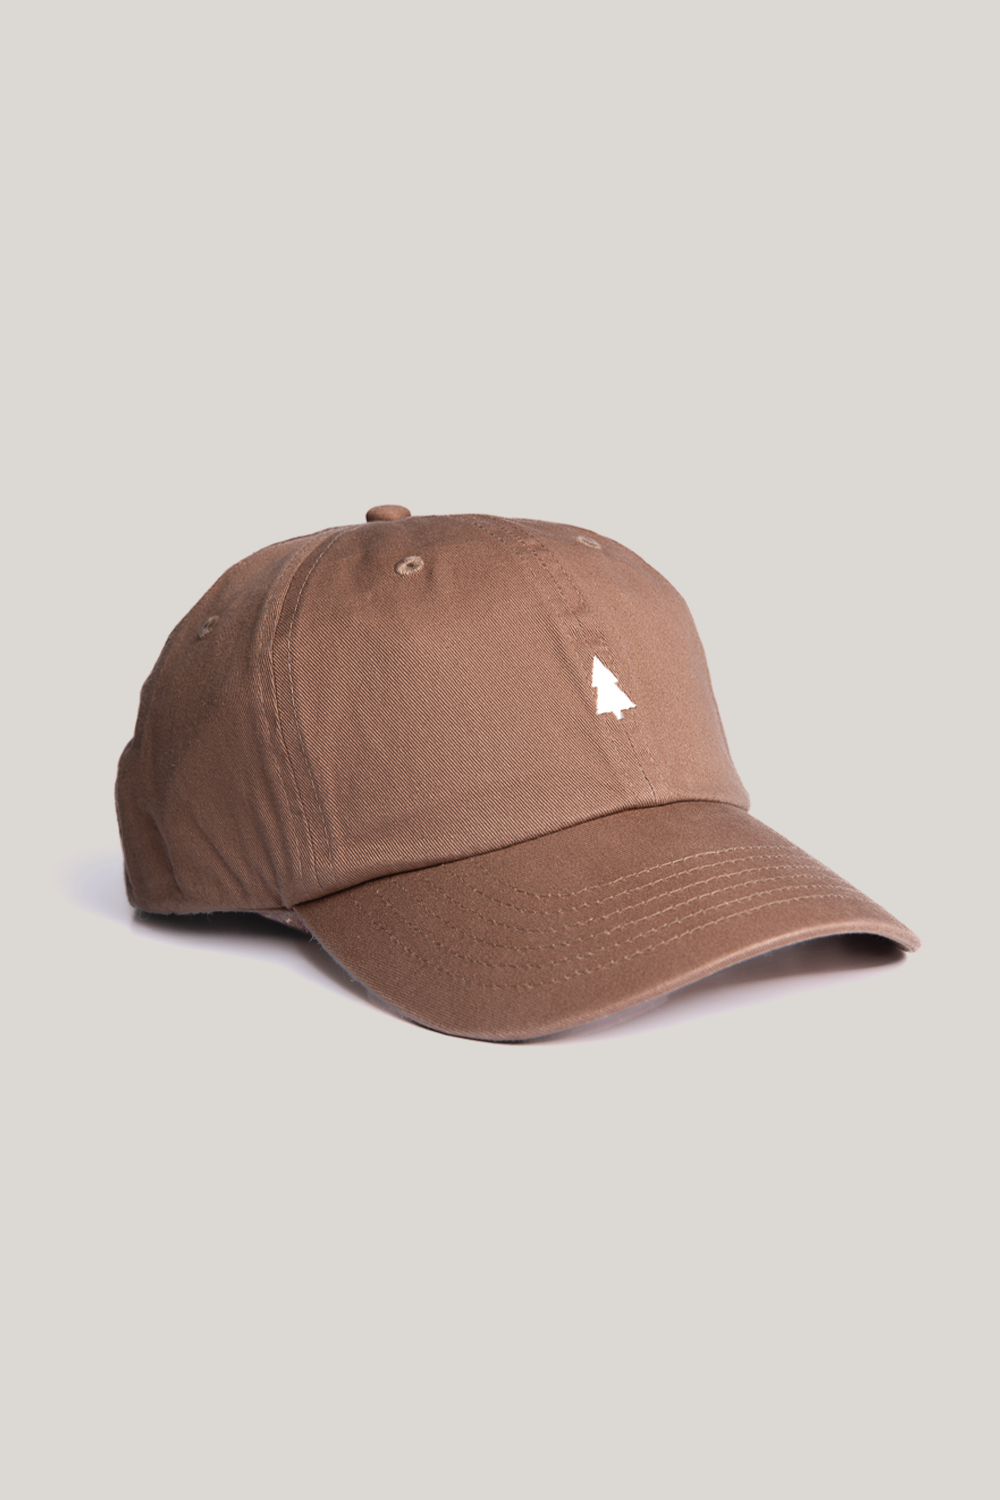 travel hiking camping outdoor hat #color_mocha brown